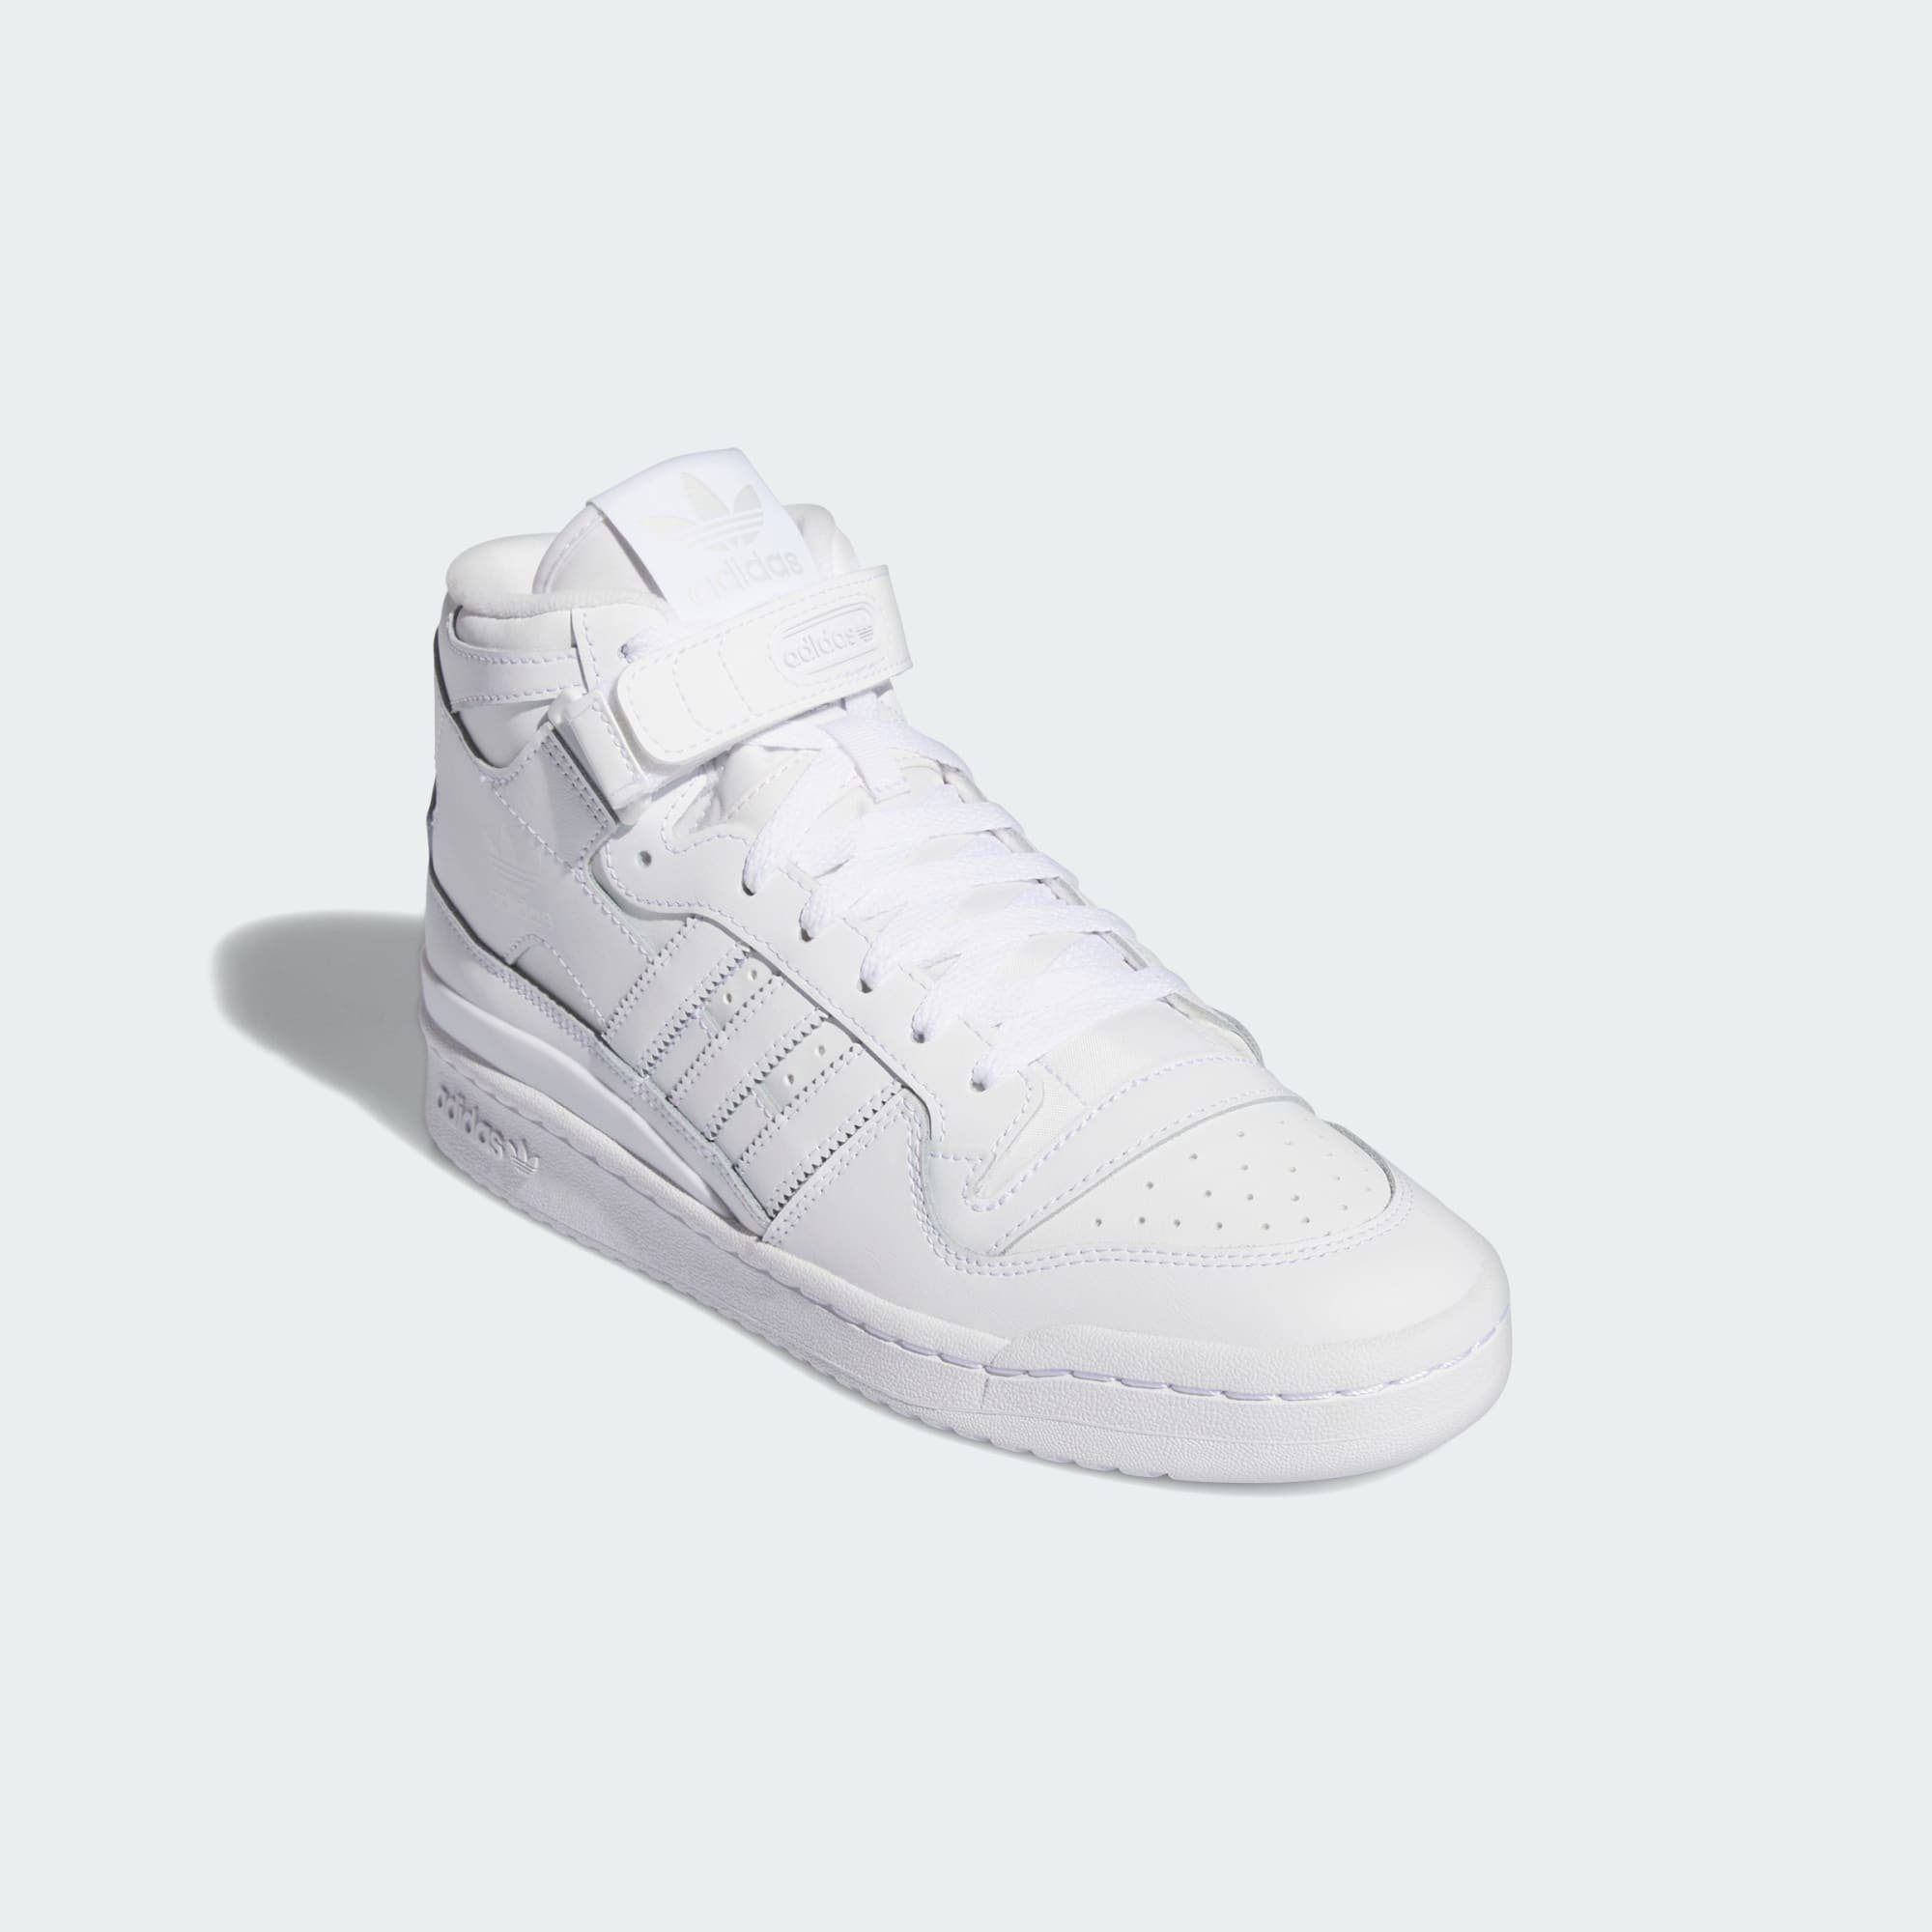 adidas Originals FORUM MID SHOES Sneaker Cloud White / Crystal White / Cloud White